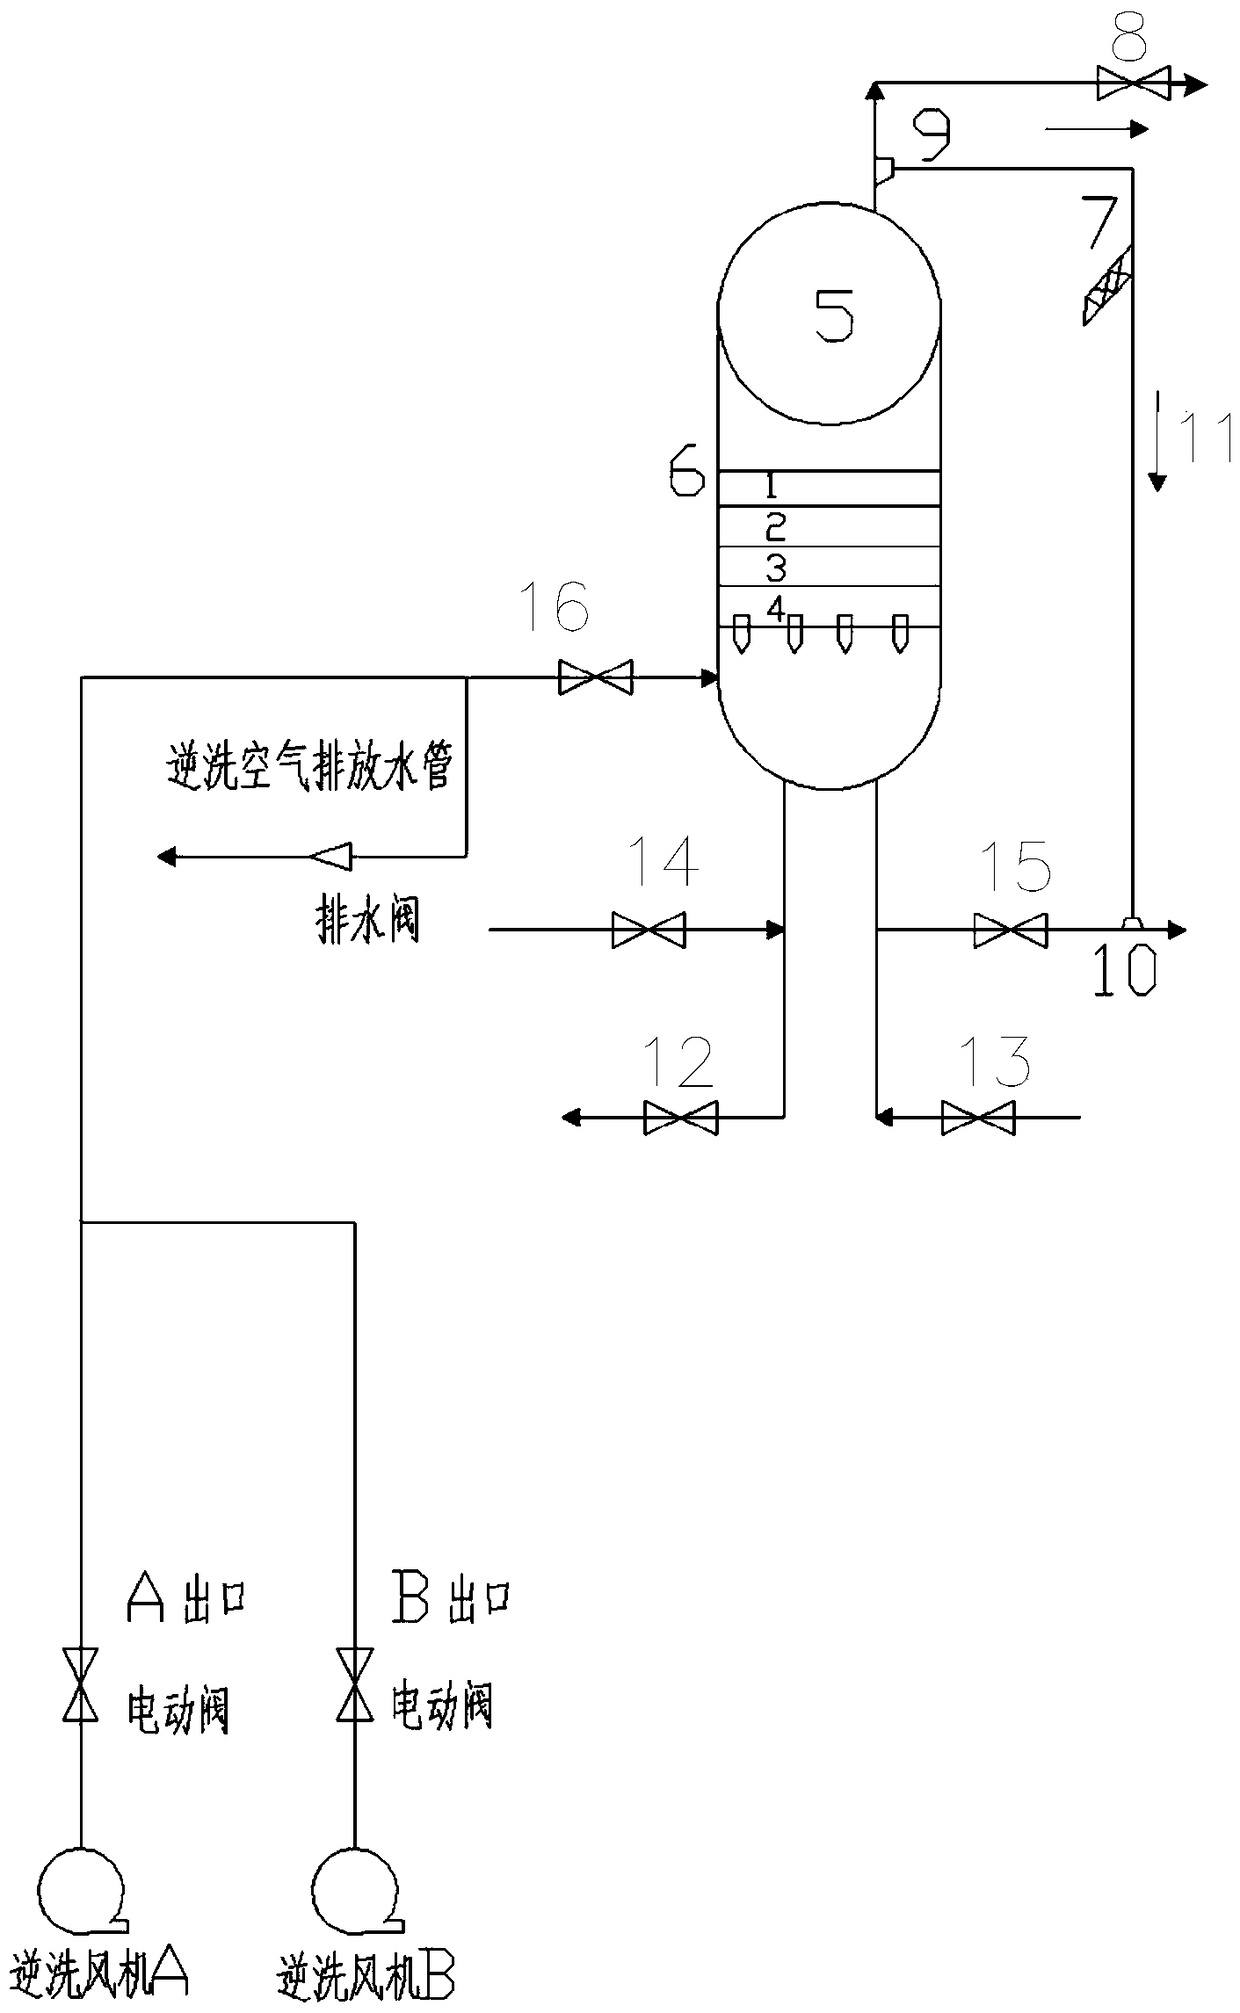 A high-speed filter with a siphon automatic residual pressure exhaust diversion pressure relief device